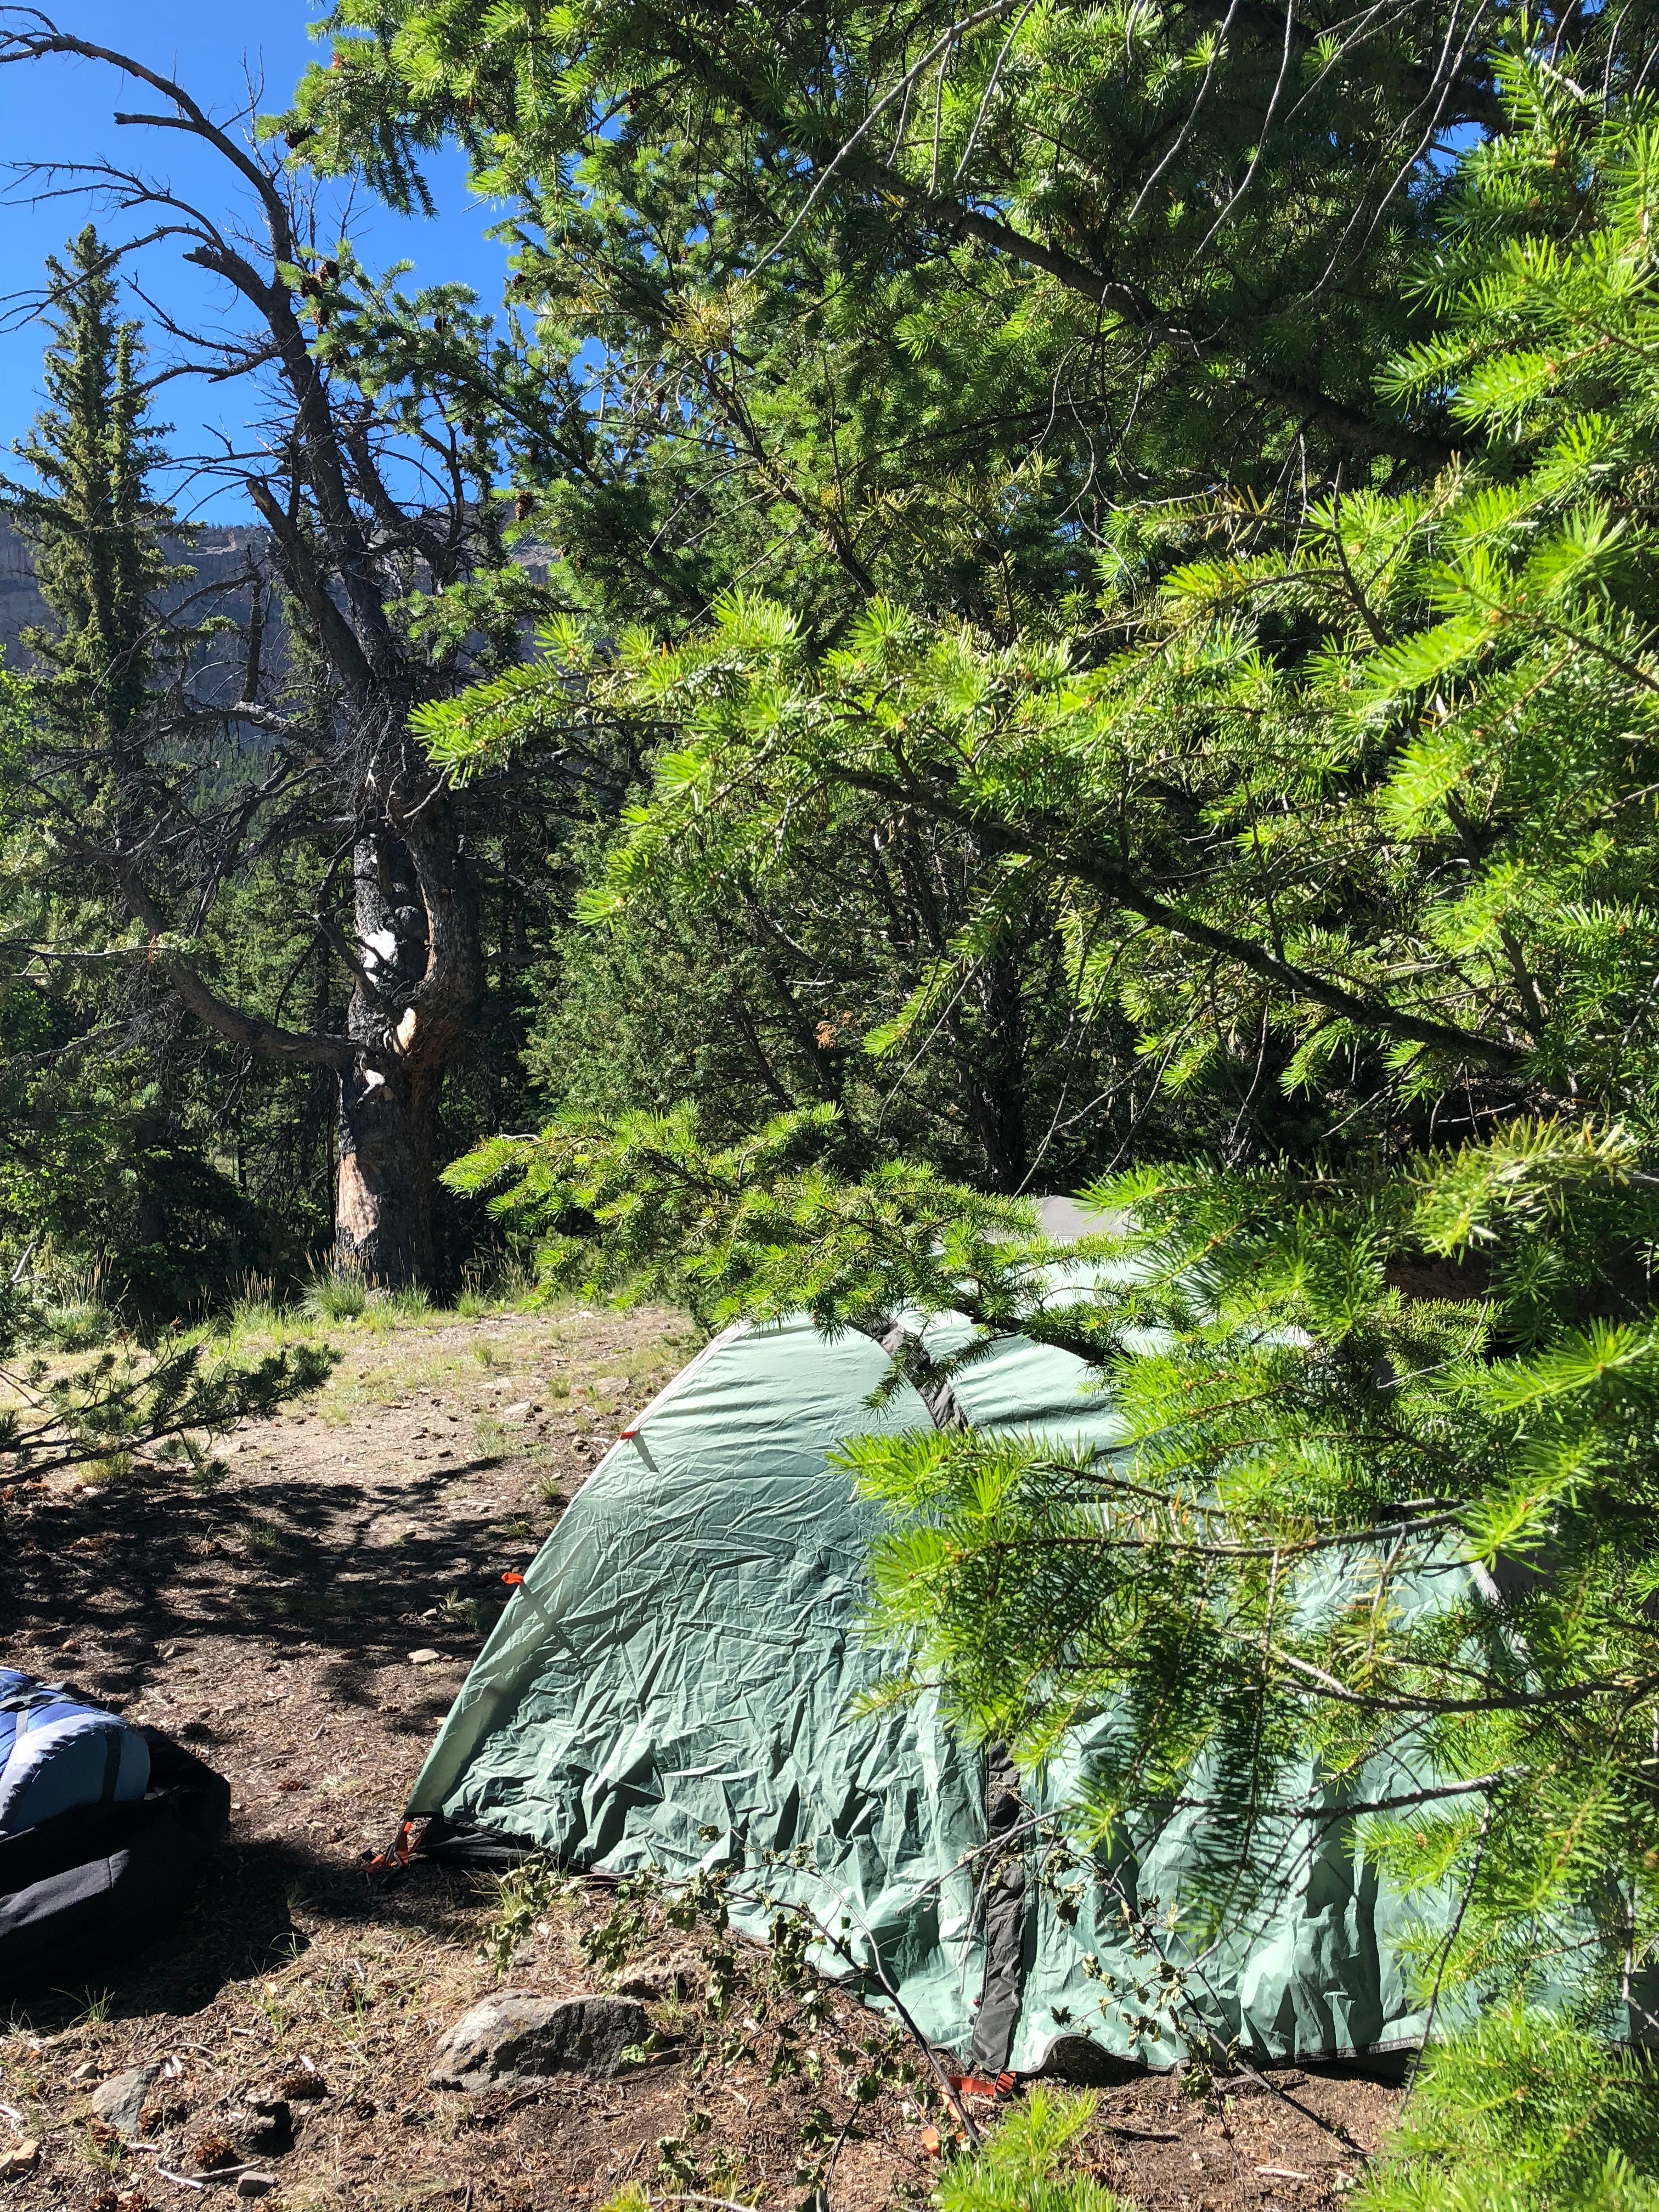 Camper submitted image from Glacier Trailhead Campsites in Fitzpatrick Wilderness Area - 3